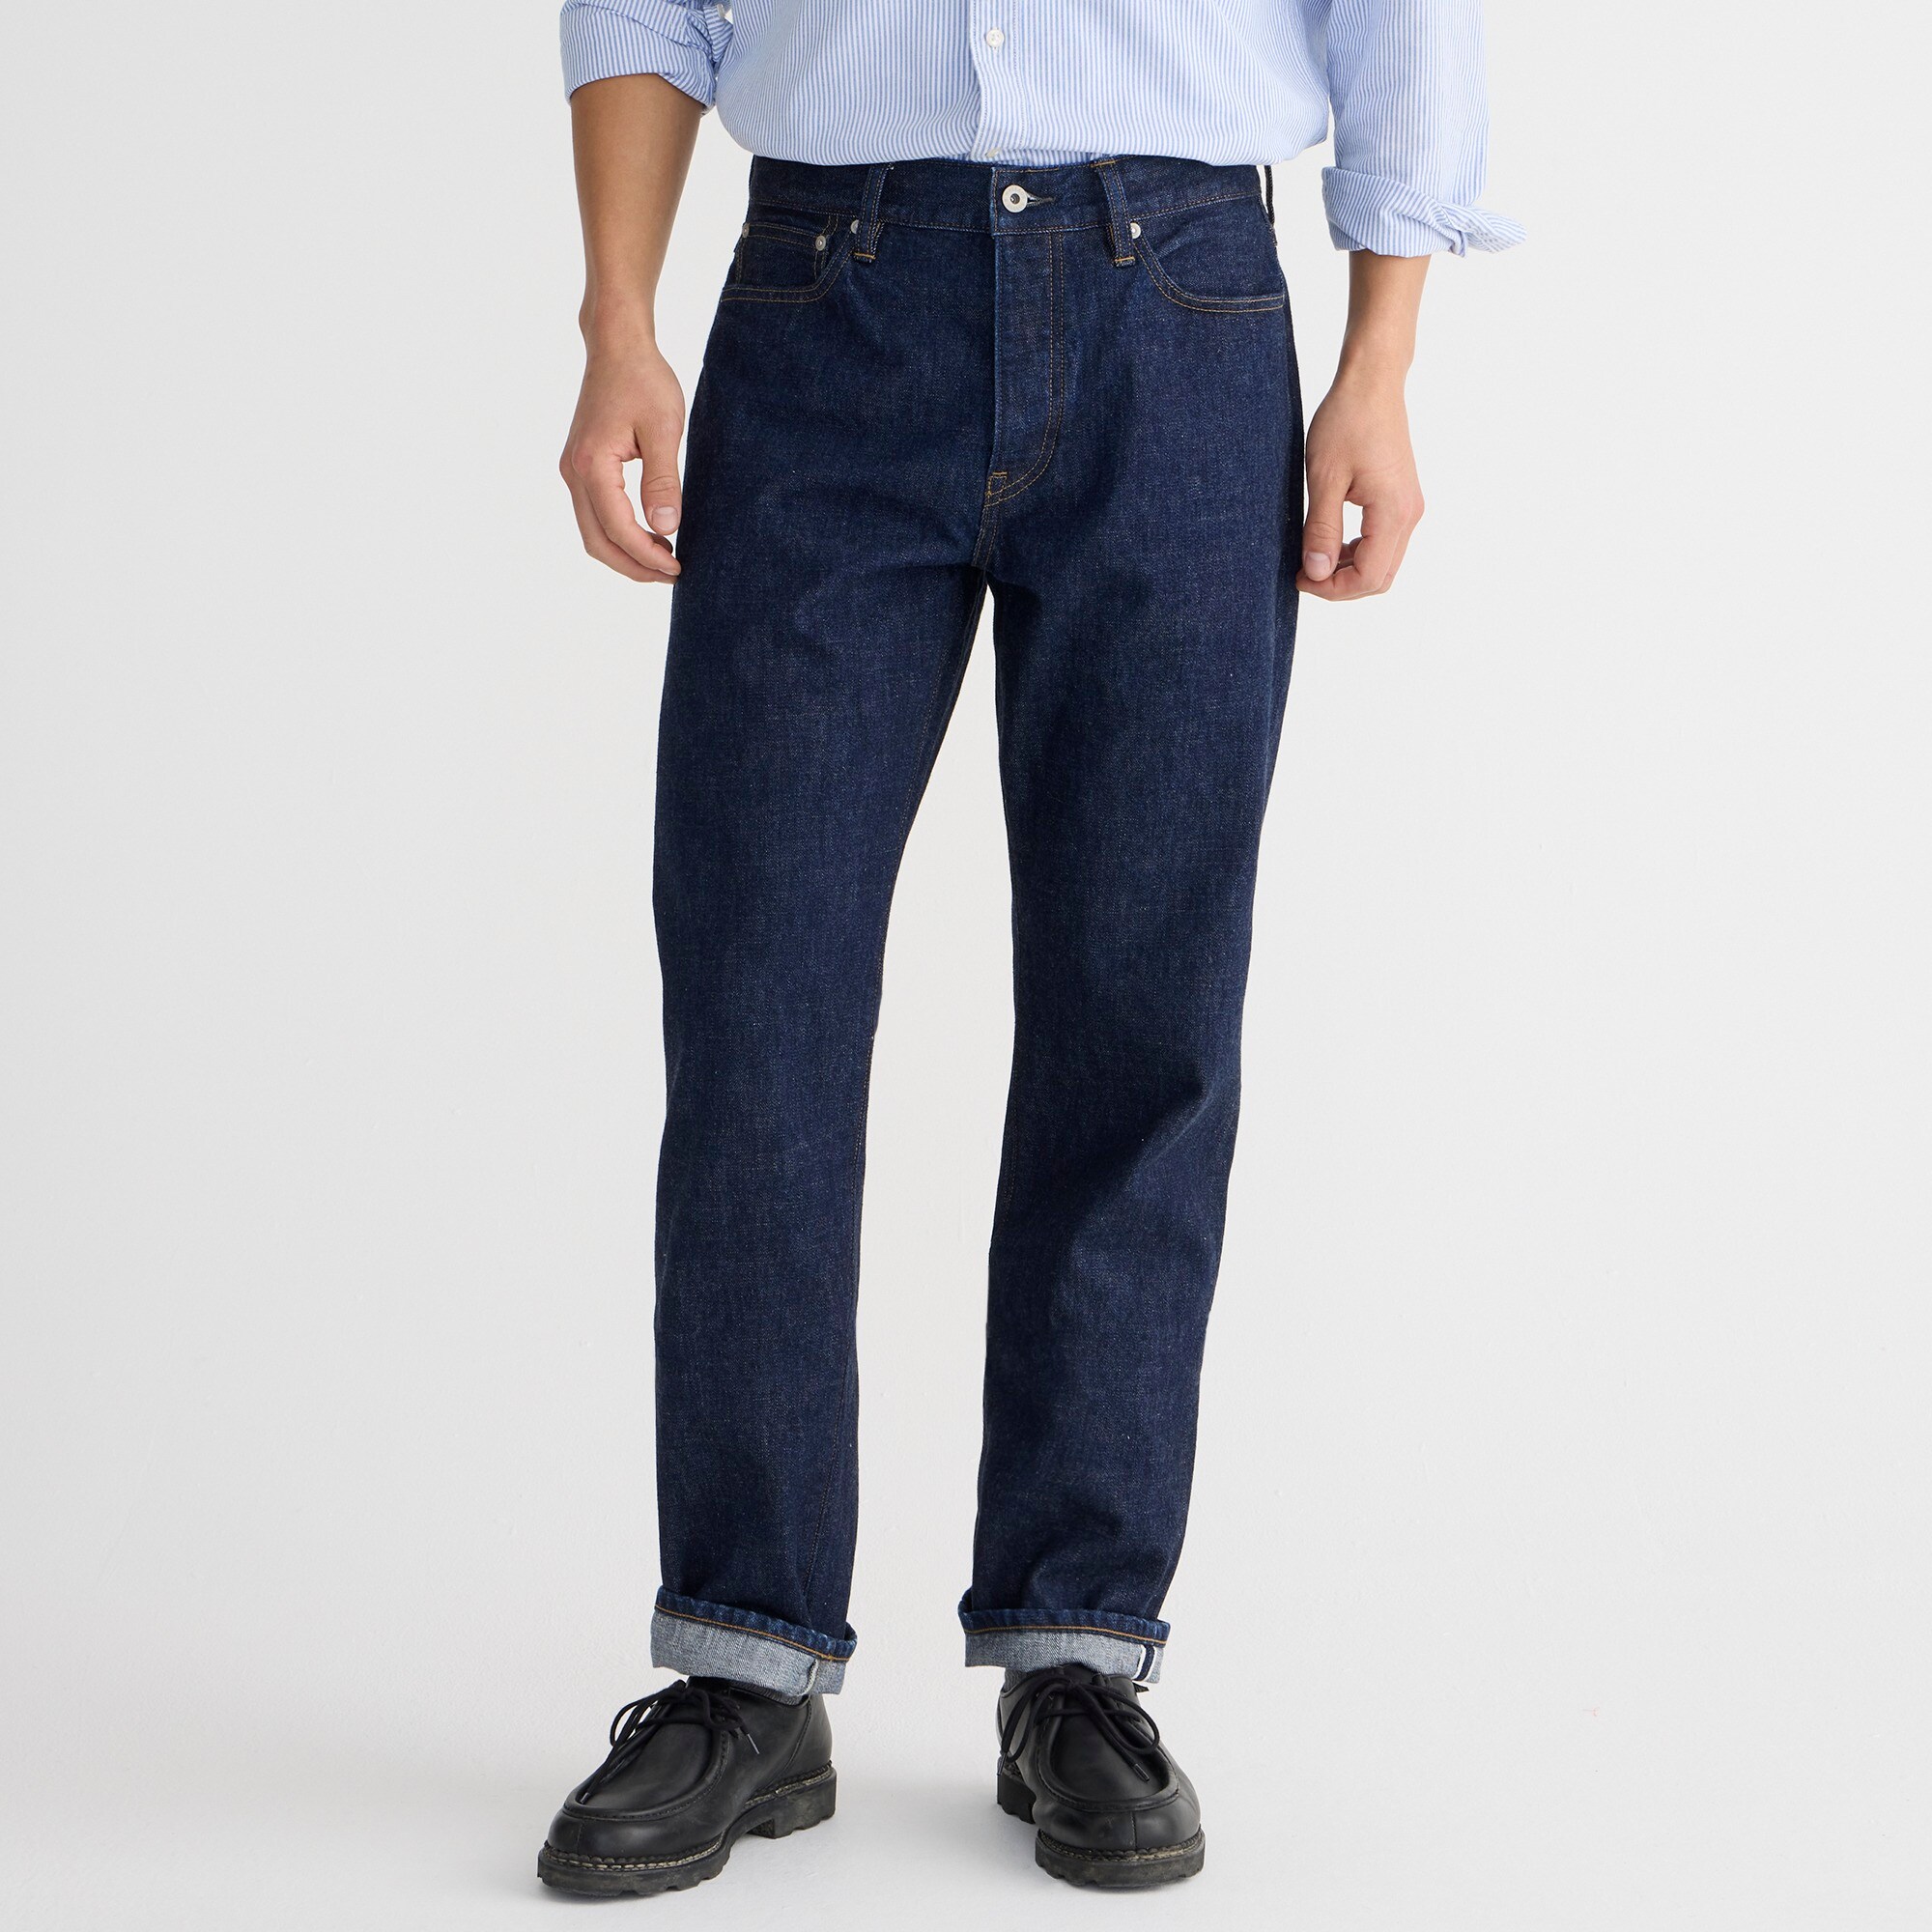  Wallace &amp; Barnes straight-fit jean in Japanese selvedge denim